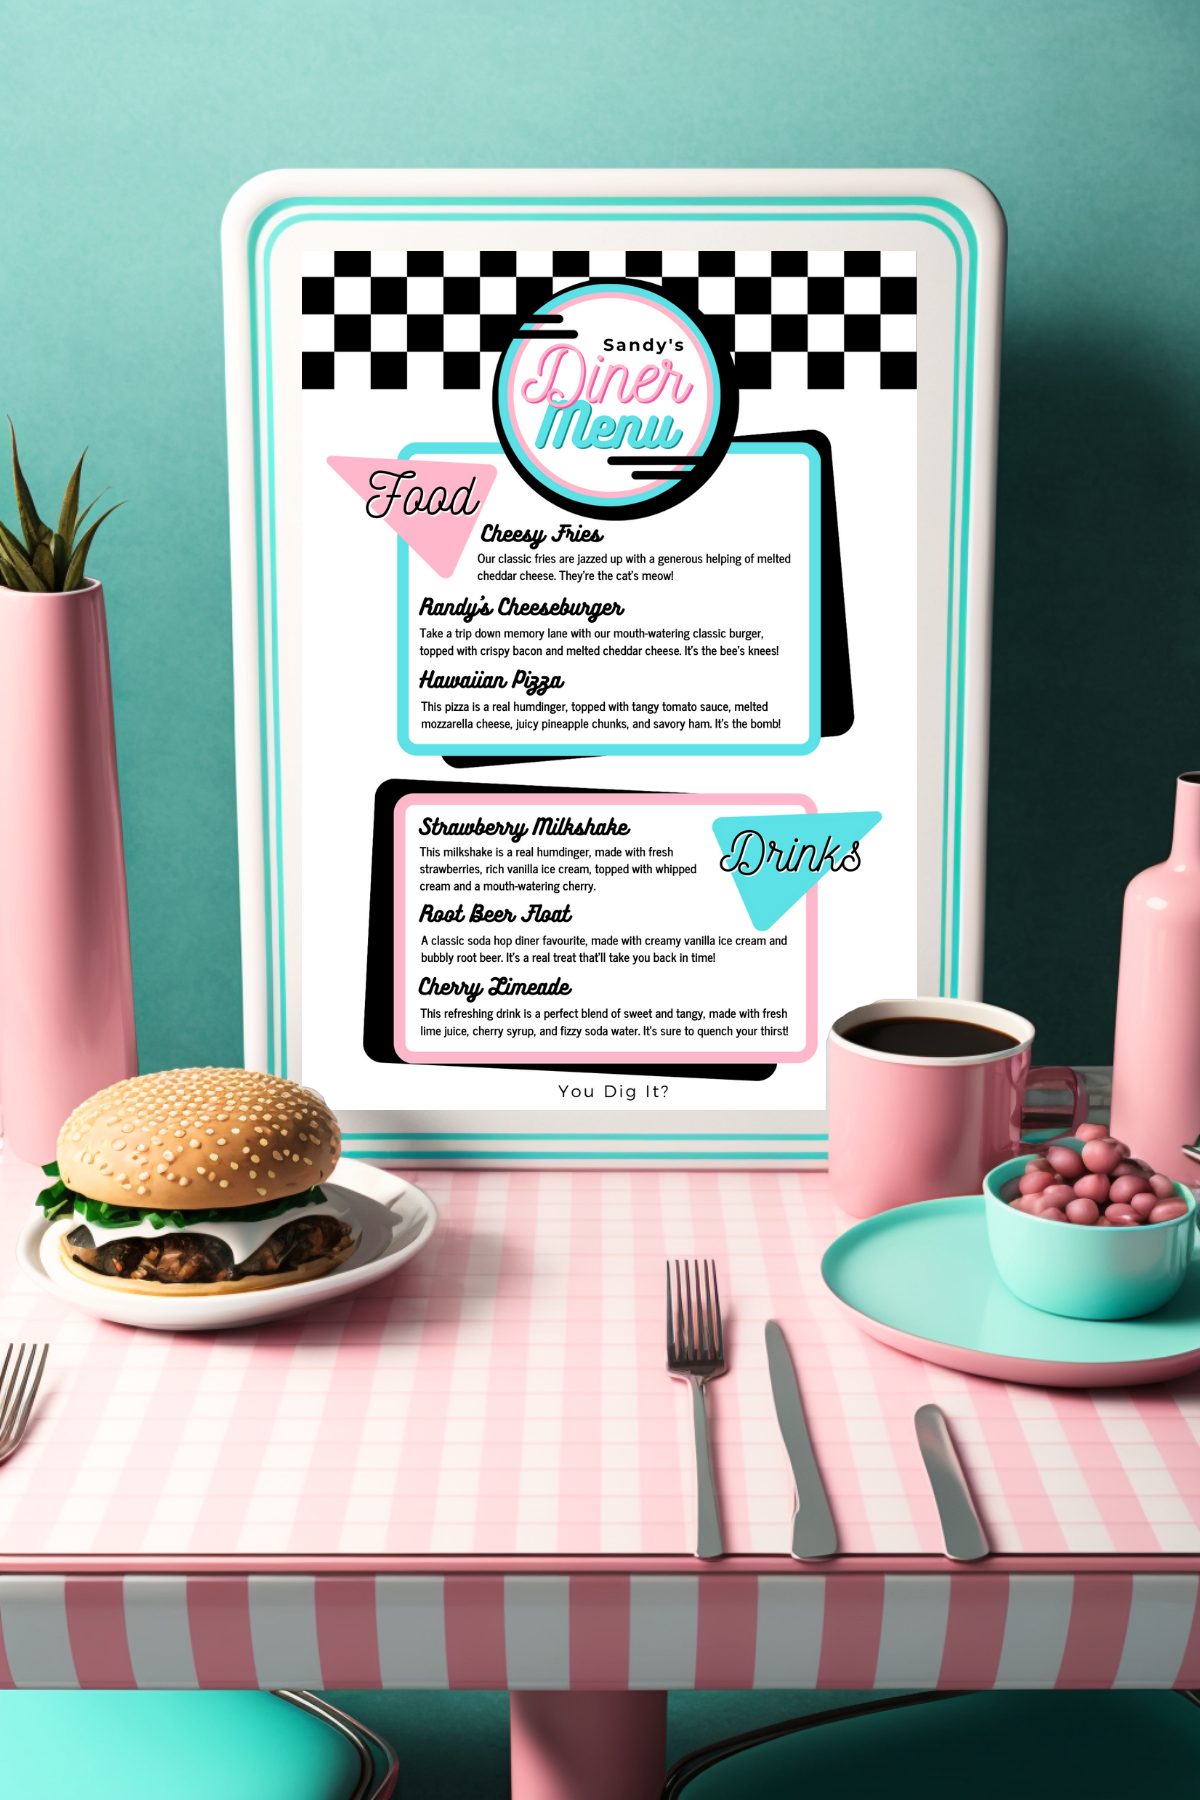 Custom DINER 50's Food Menu Party PRINTABLE, Rock'n'roll Soda Pop Retro 1950s poster Birthday fifties personalised customized editable decorations Grease Sock Hop Route 66 greaser fifties rocknroll themed birthday Canva edit print off digital download